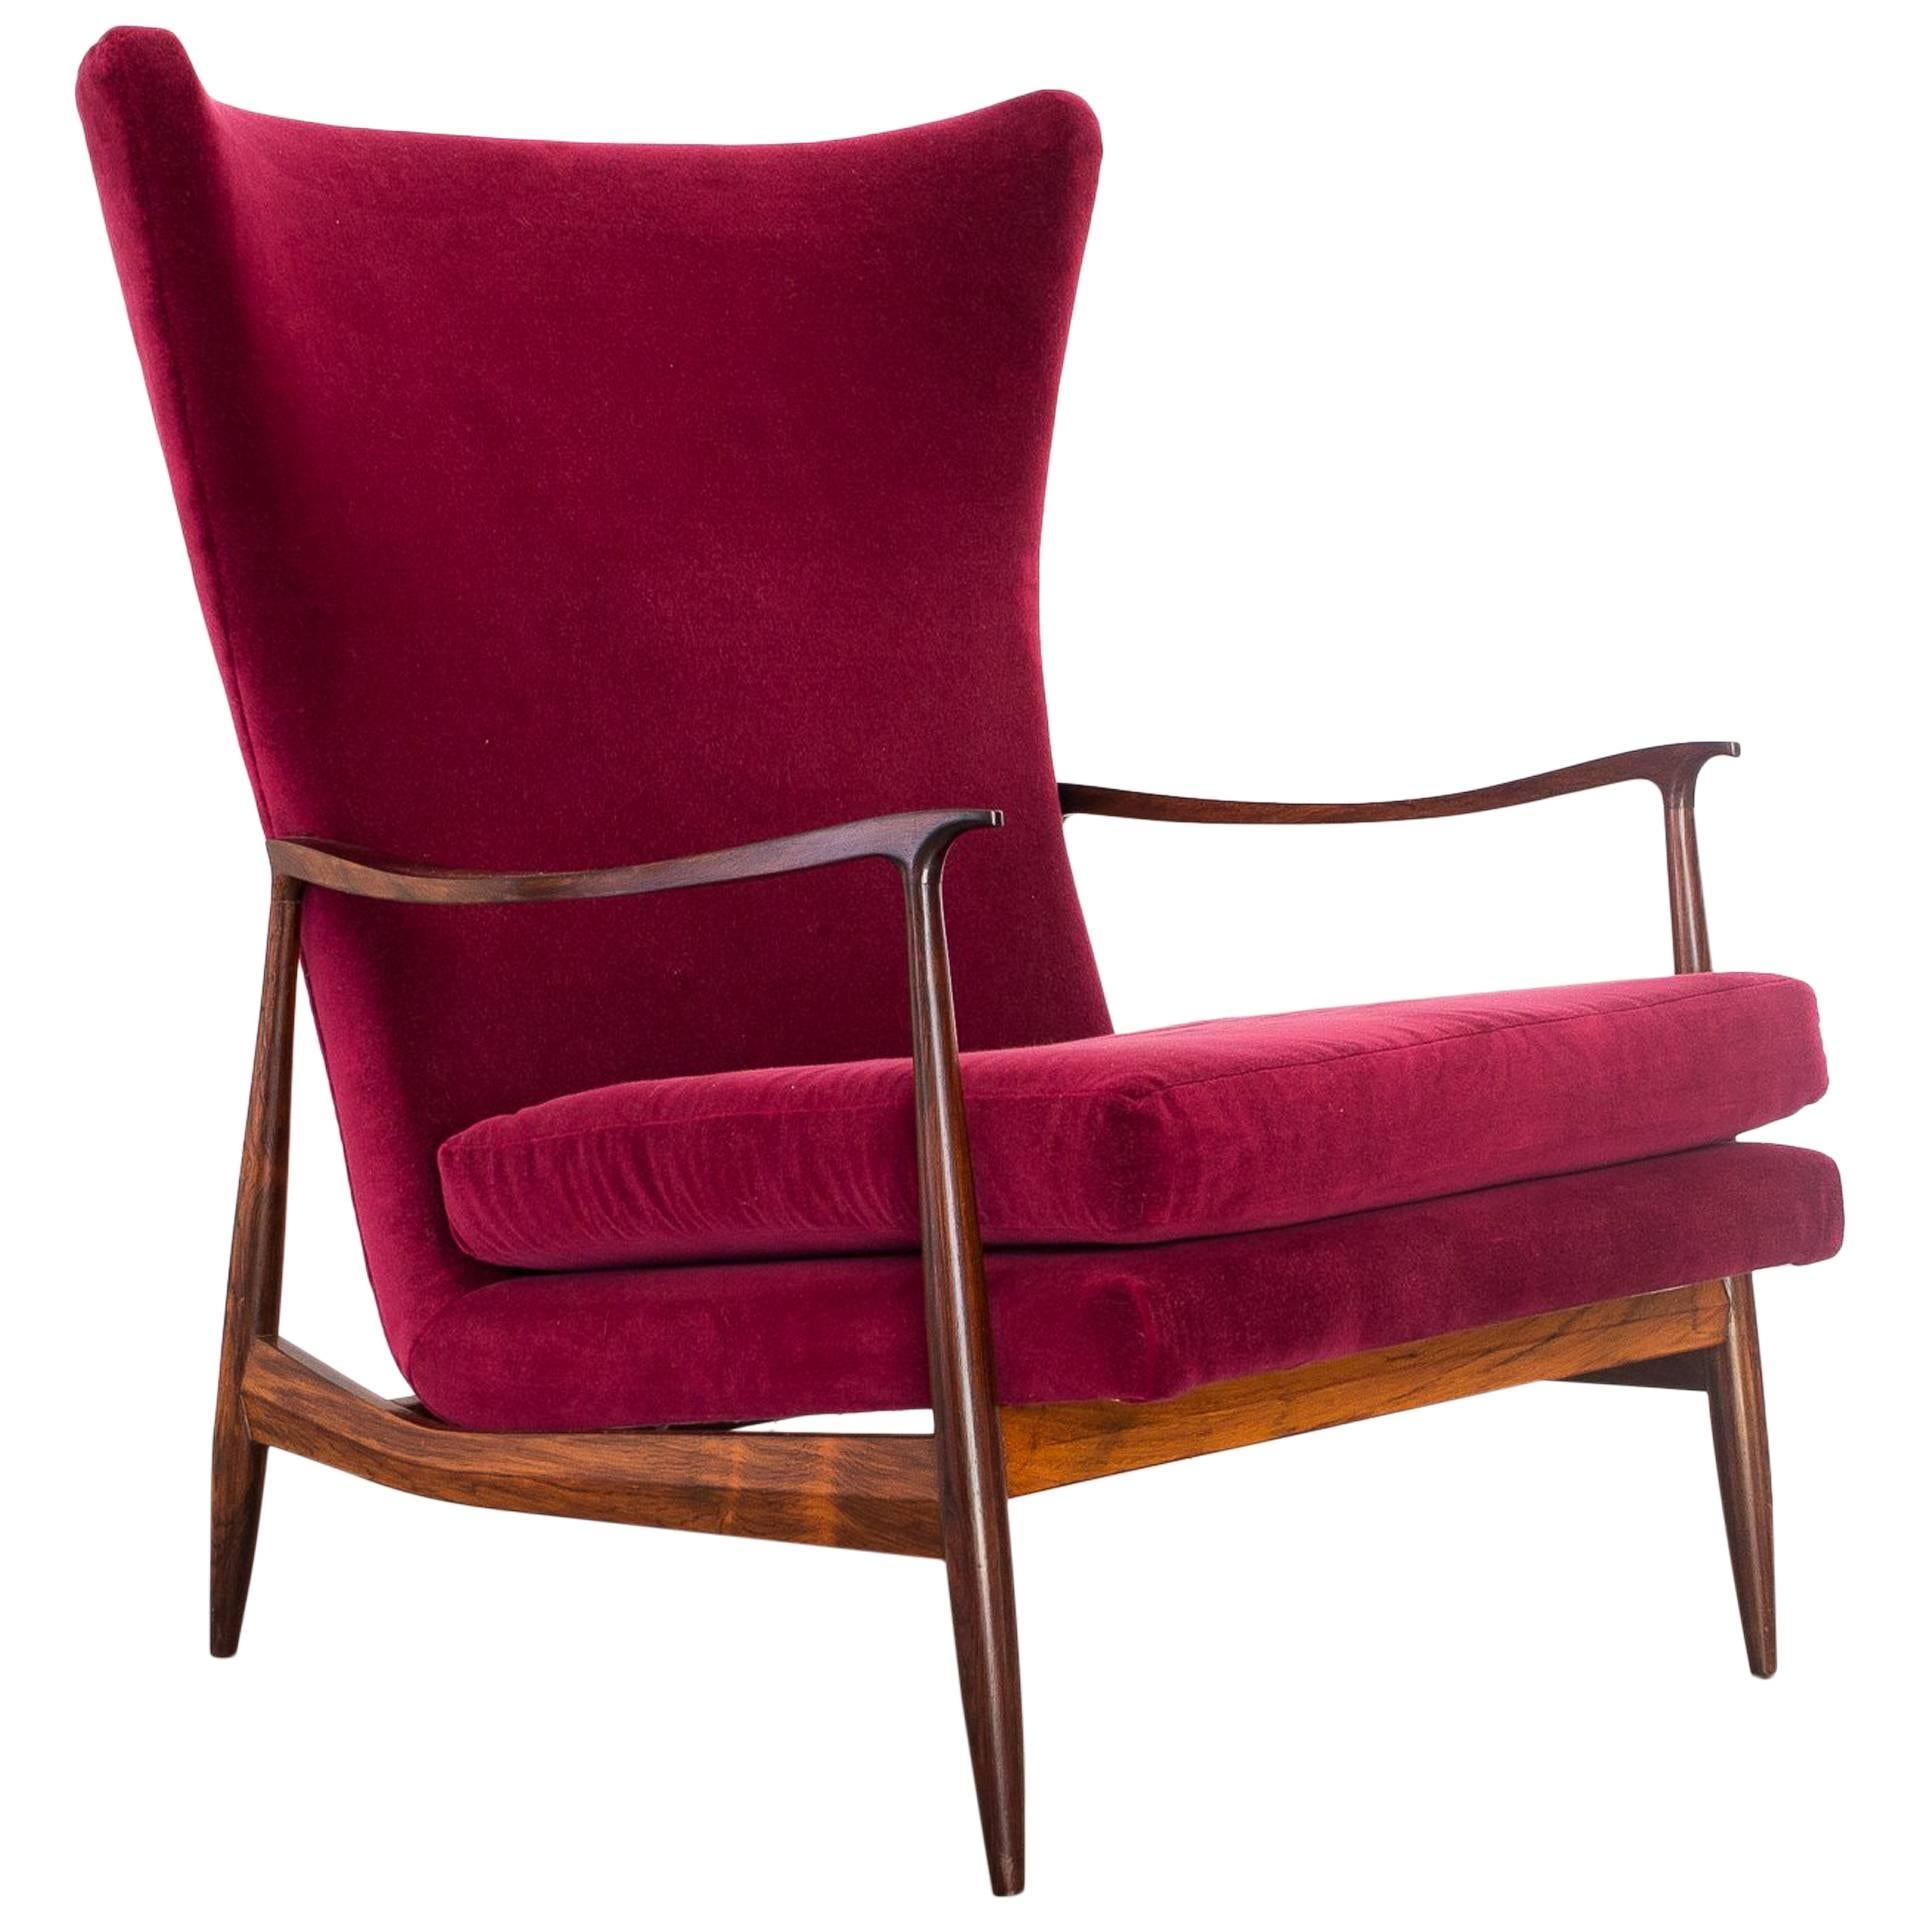 1960s Wingback Lounge Chair in Rosewood and Velvet by Móveis Cimo, Brazil Modern